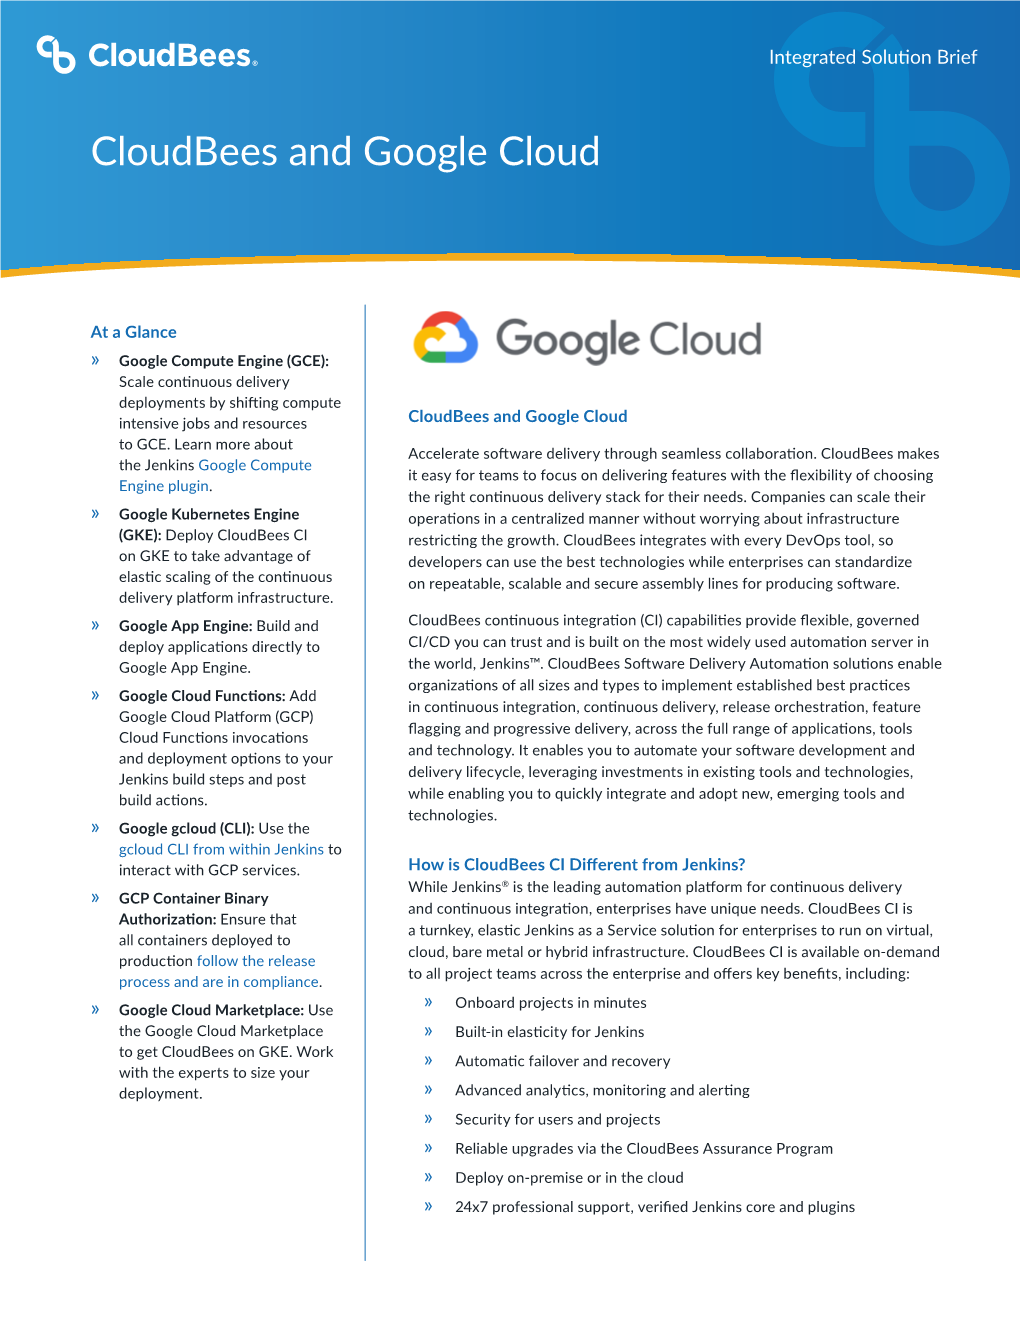 Cloudbees and Google Cloud